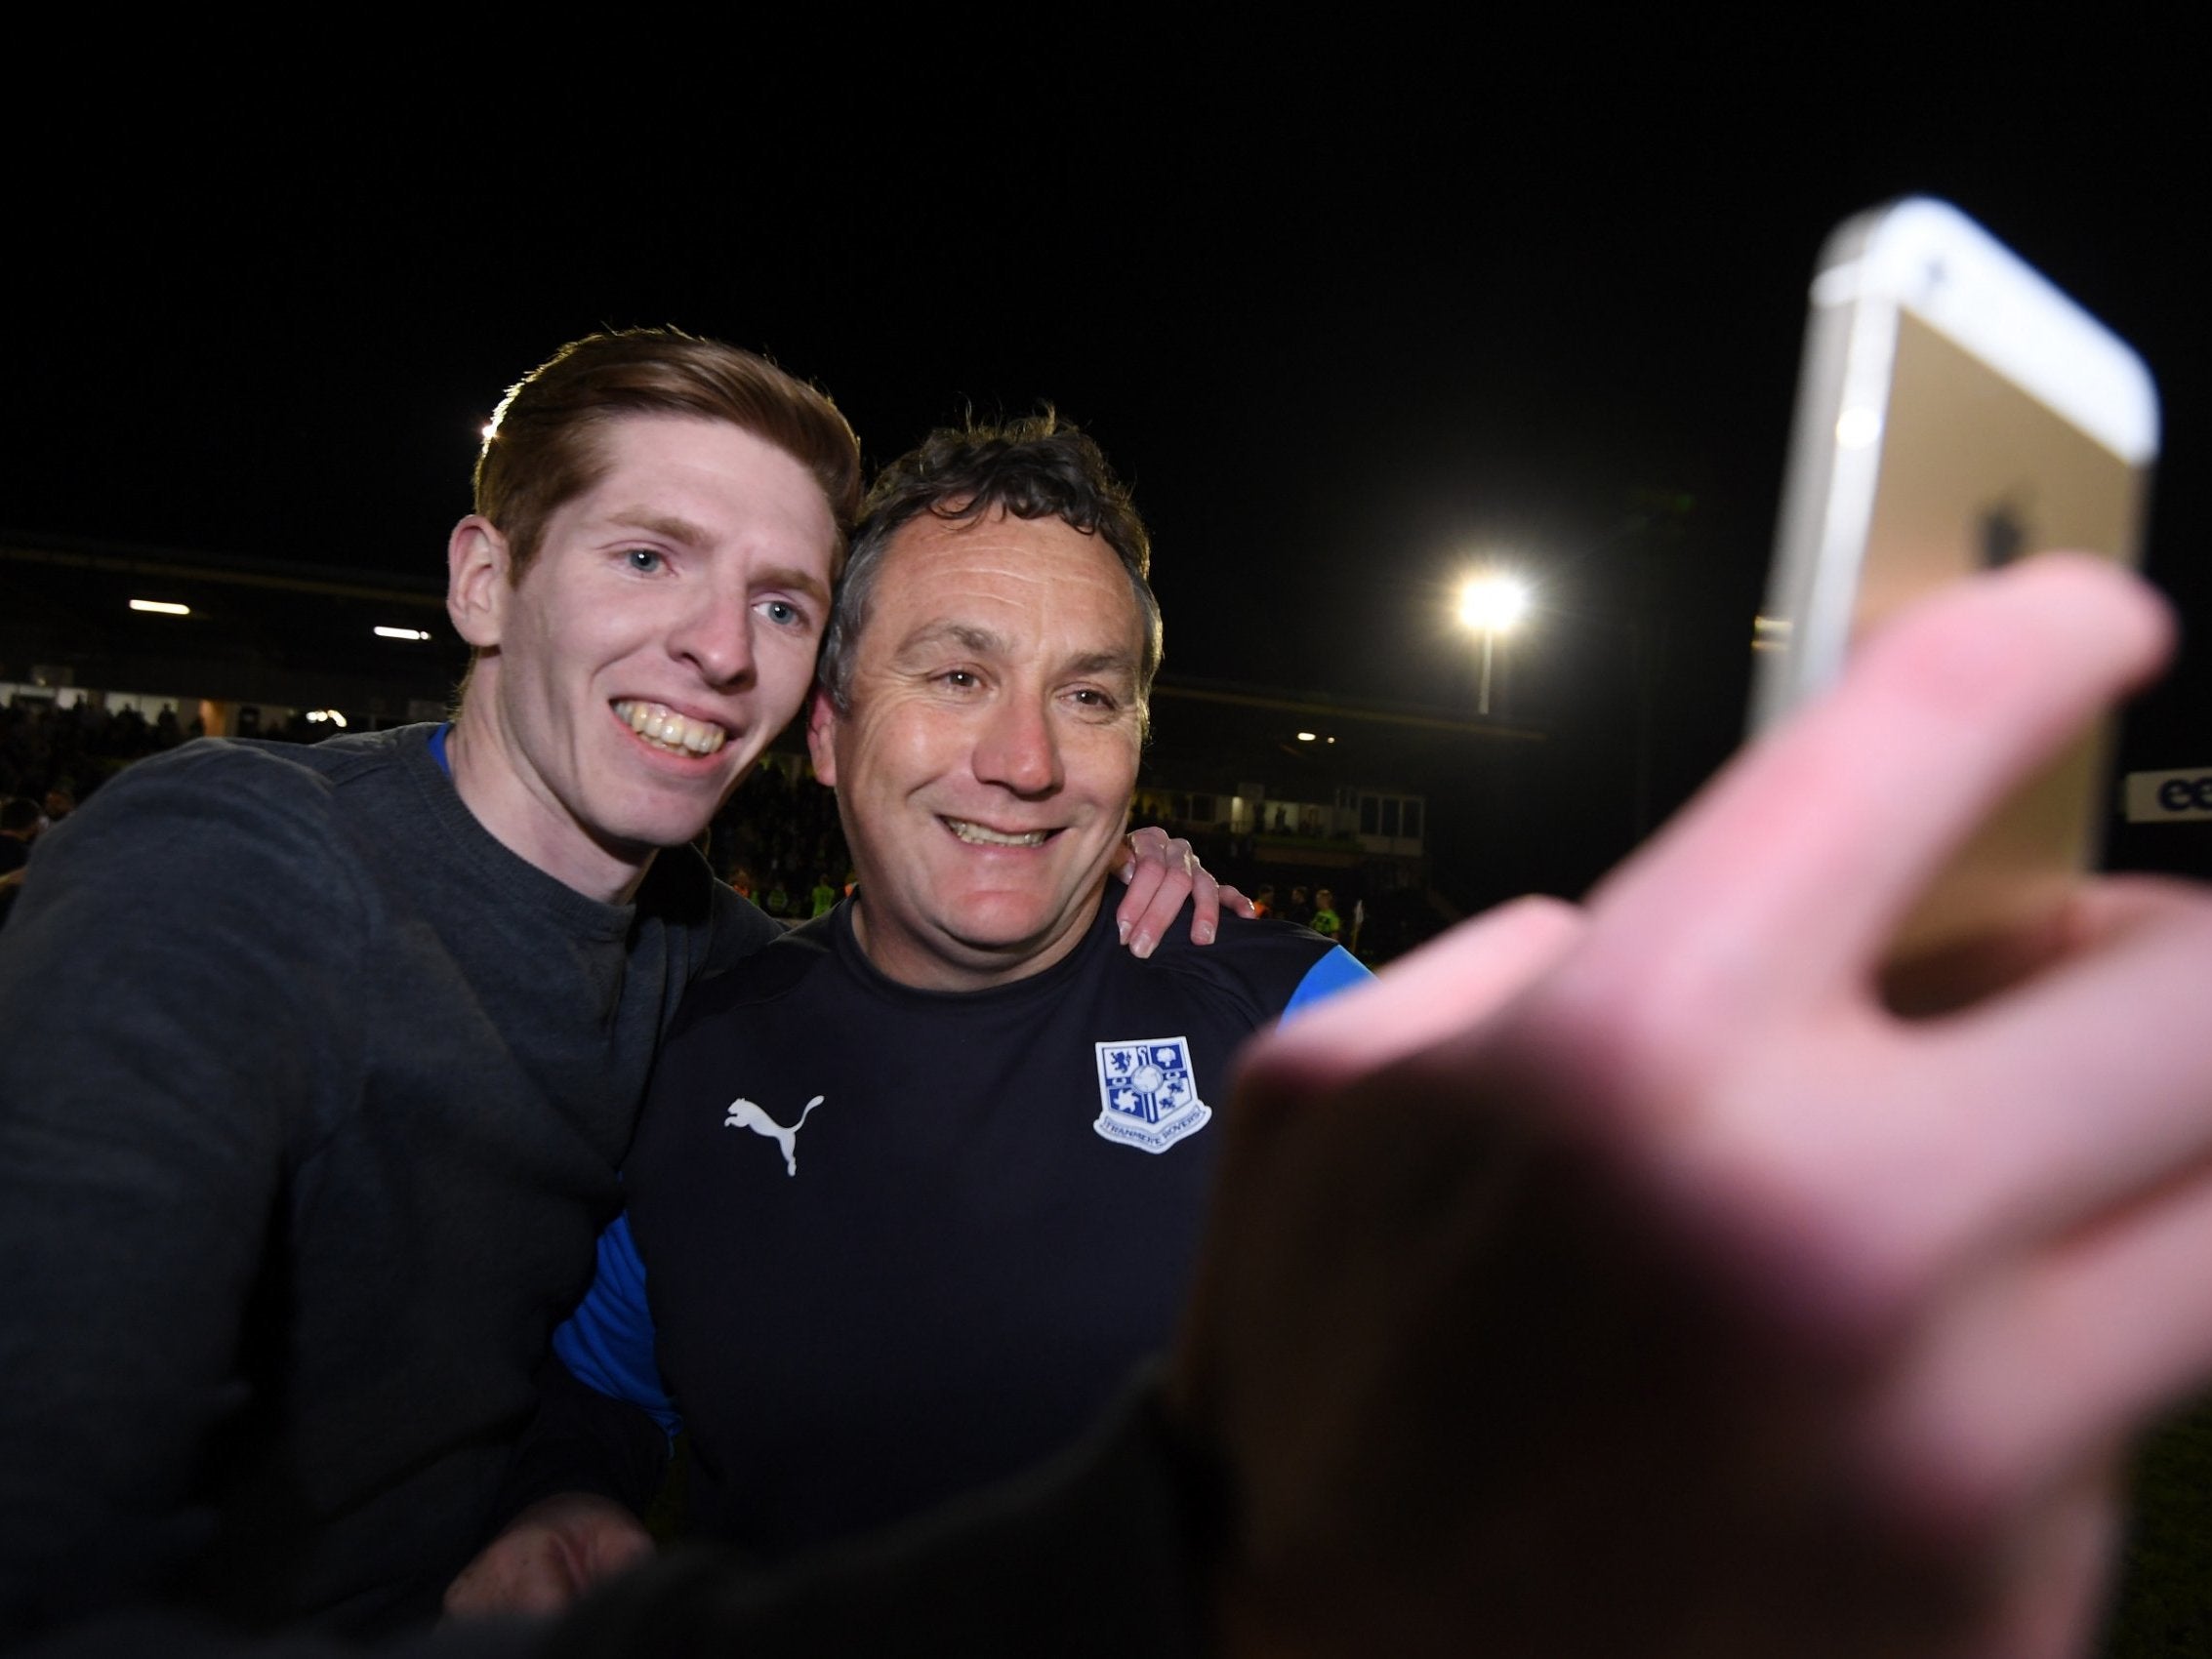 A Tranmere Rovers fan poses for a selfie with Tranmere manager Micky Mellon